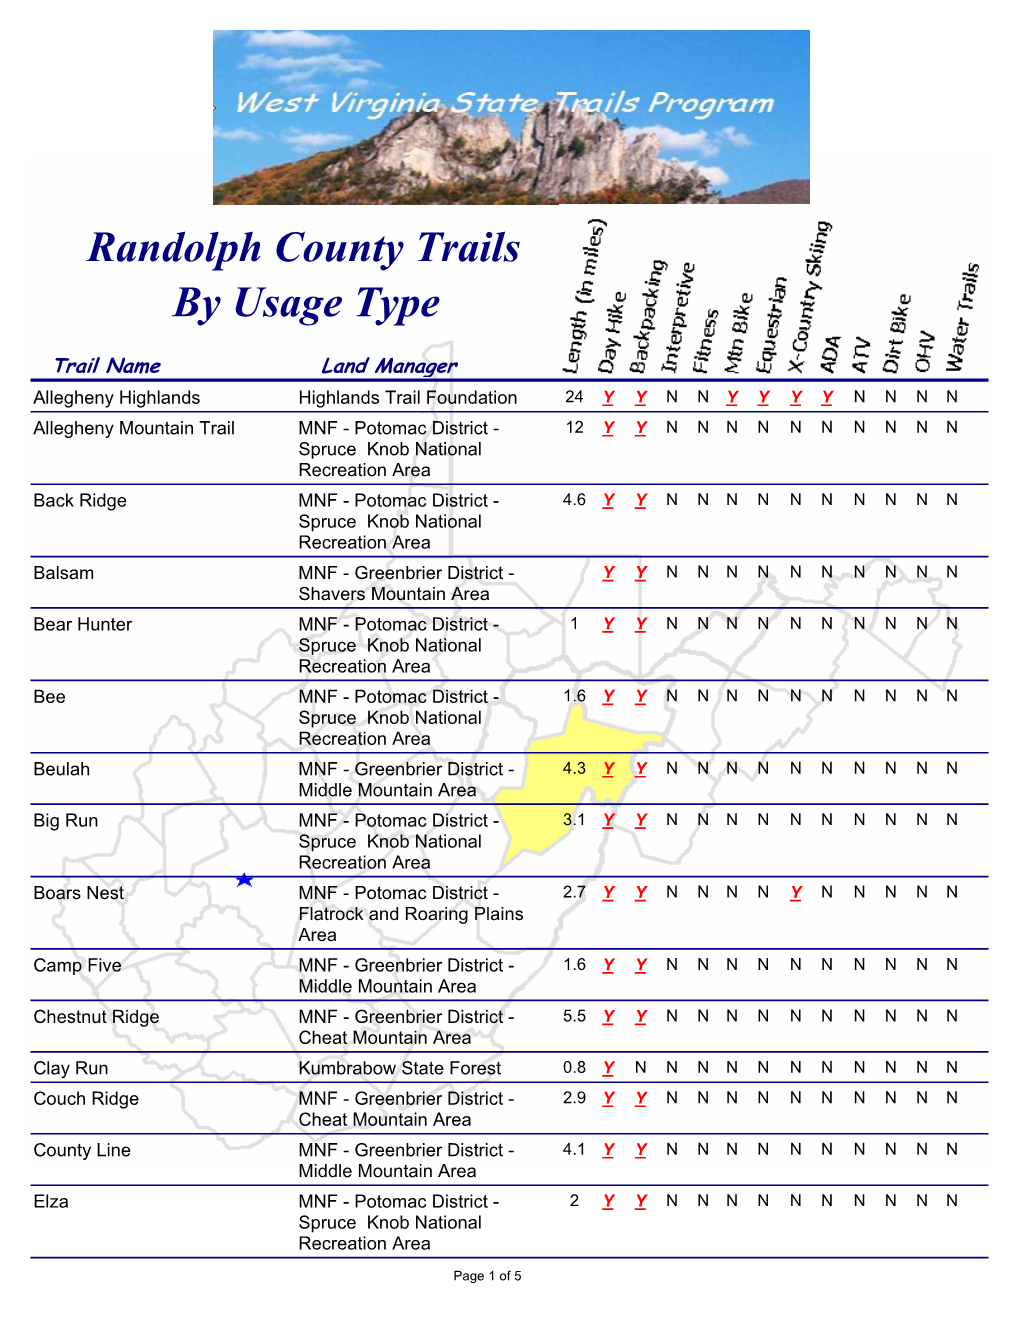 Randolph County Trails by Usage Type